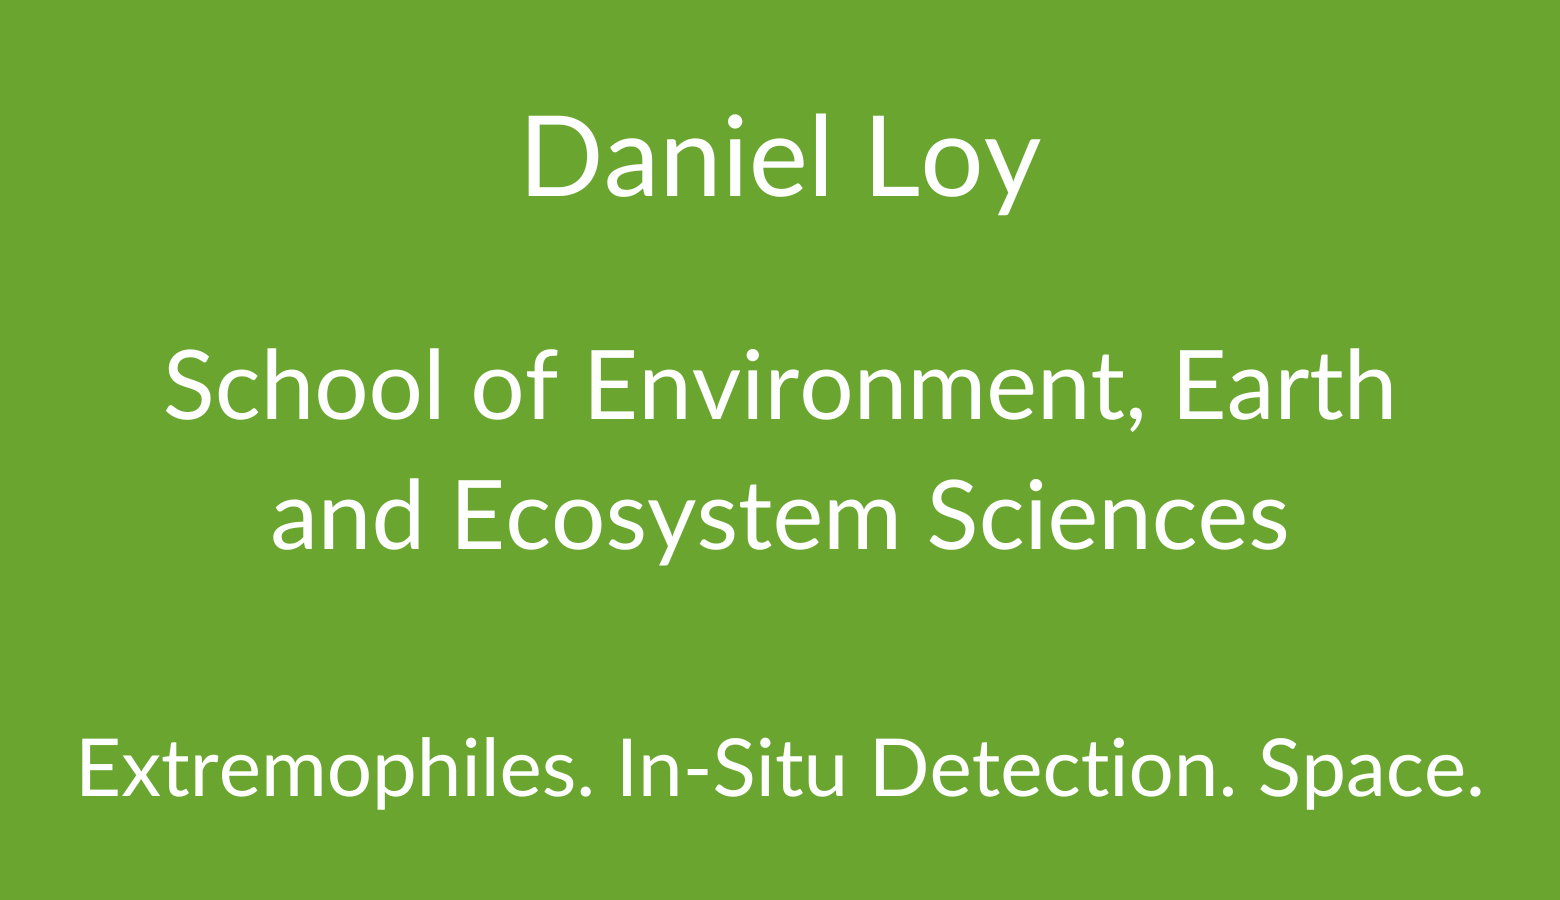 Daniel Loy. School of Environment, Earth and Ecosystem Sciences. Extremophiles. In-Situ Detection. Space..